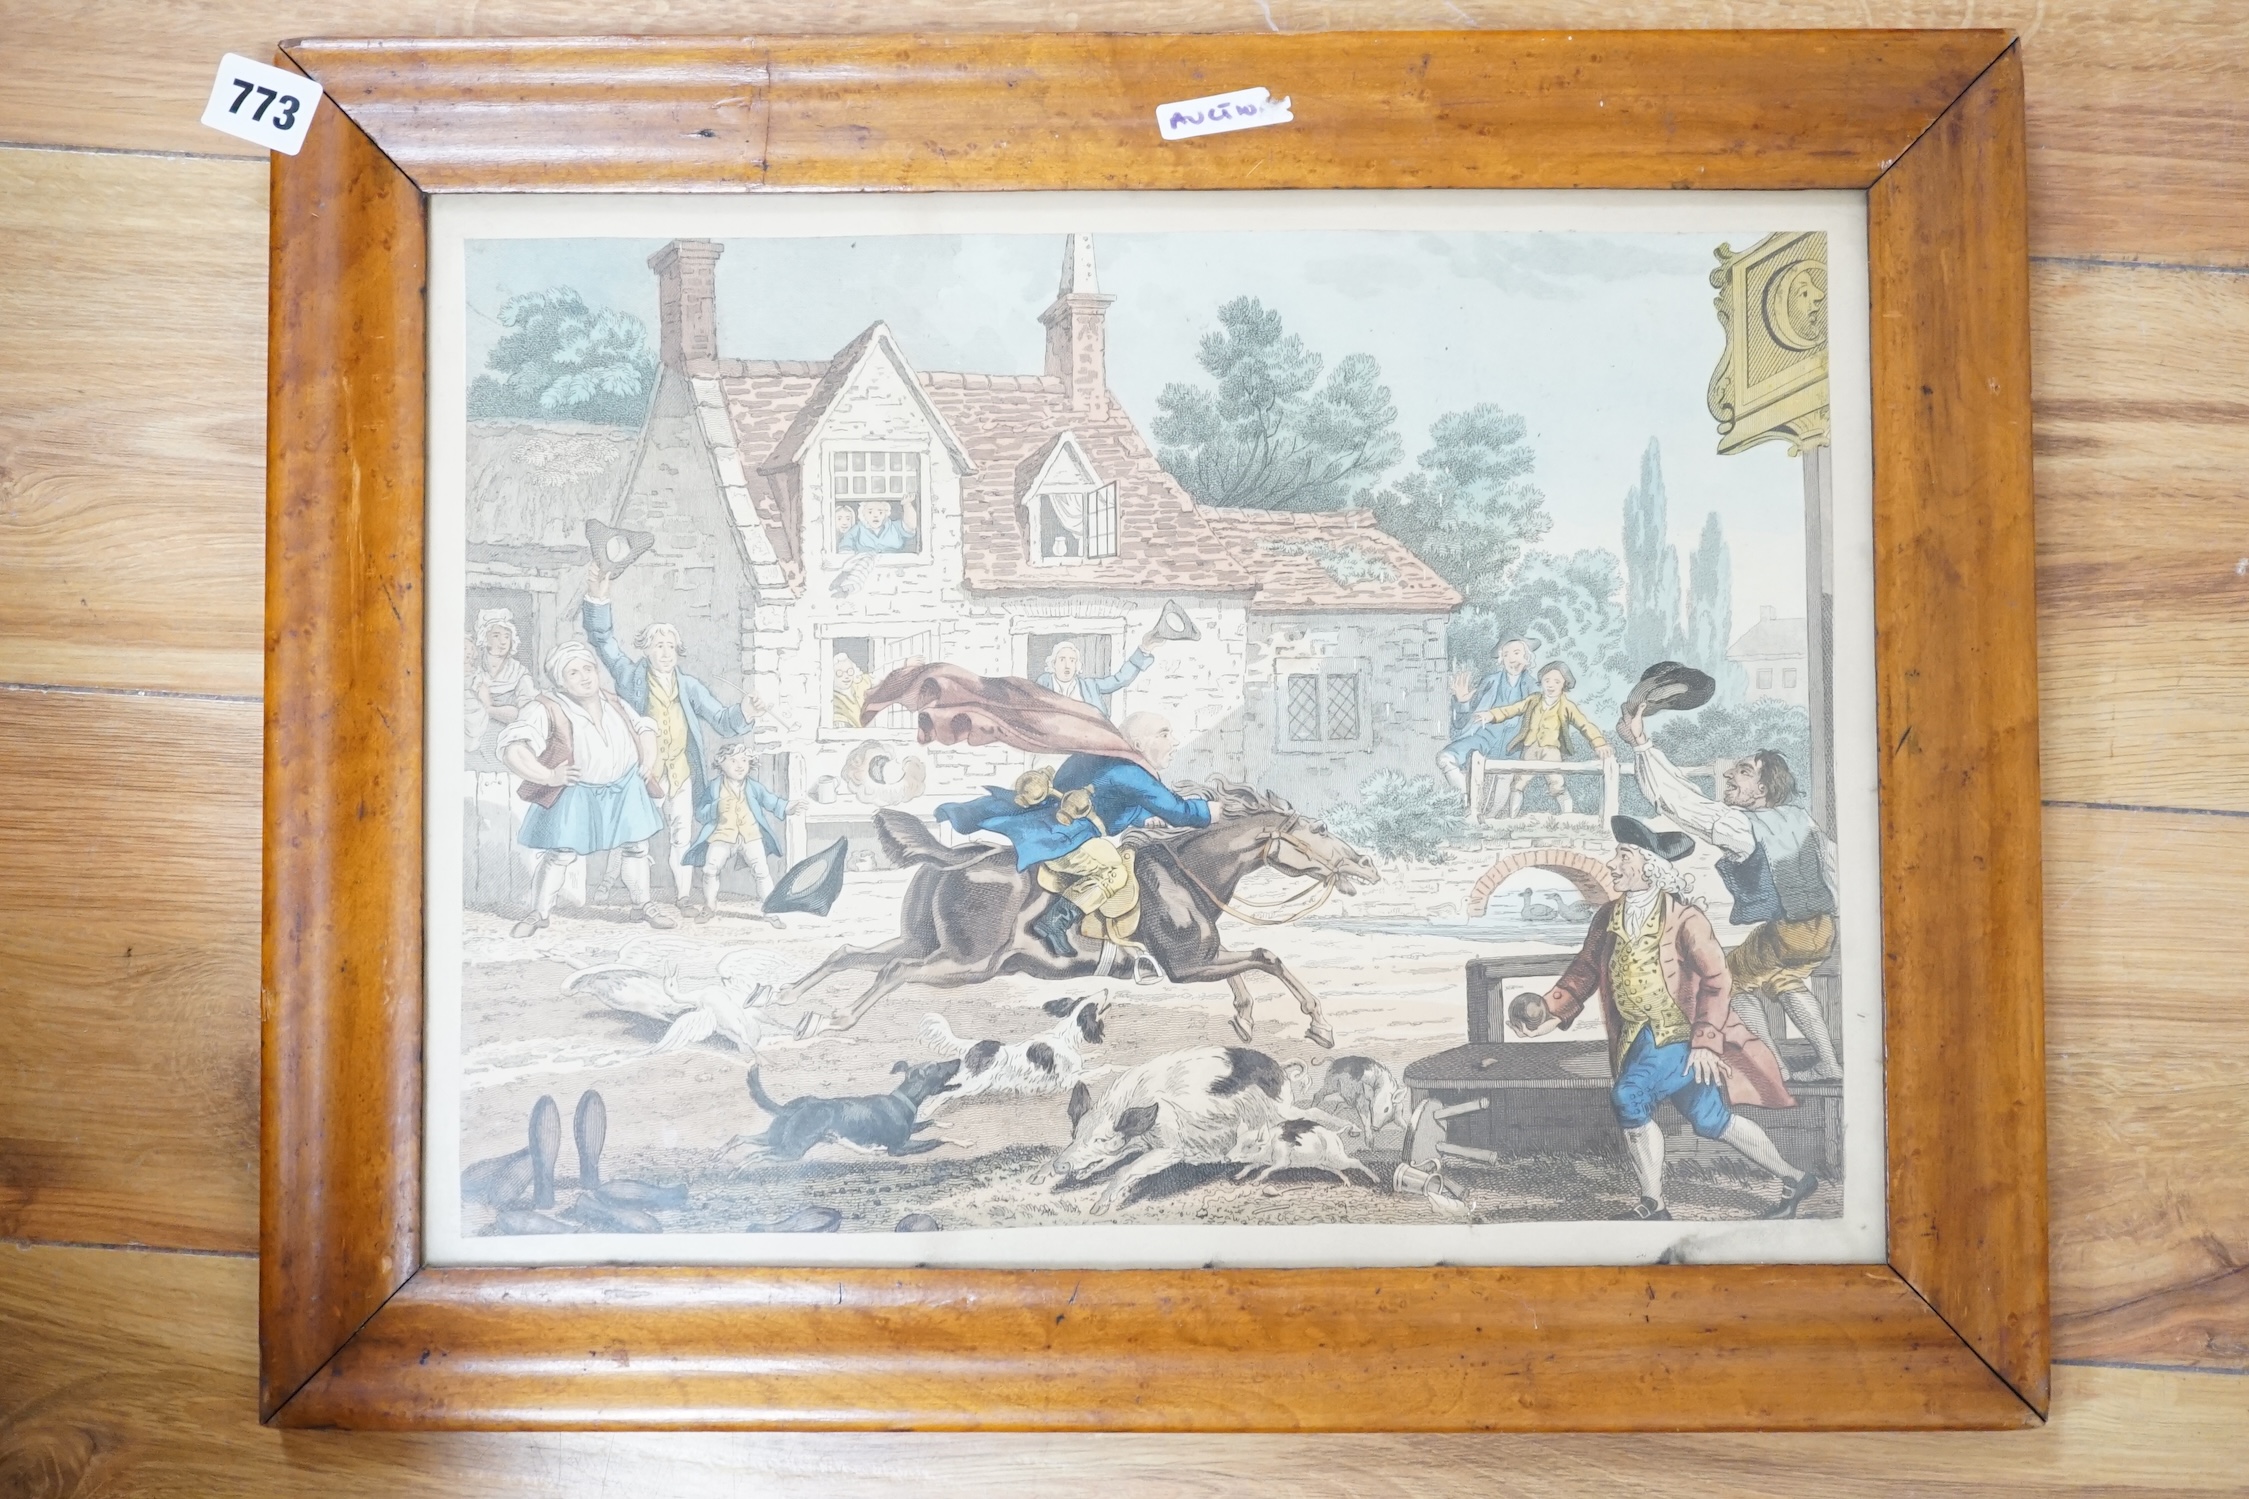 18th century English School, coloured engraving, 'Gilpins Ride', 28 x 38cm, maple framed. Condition - poor to fair